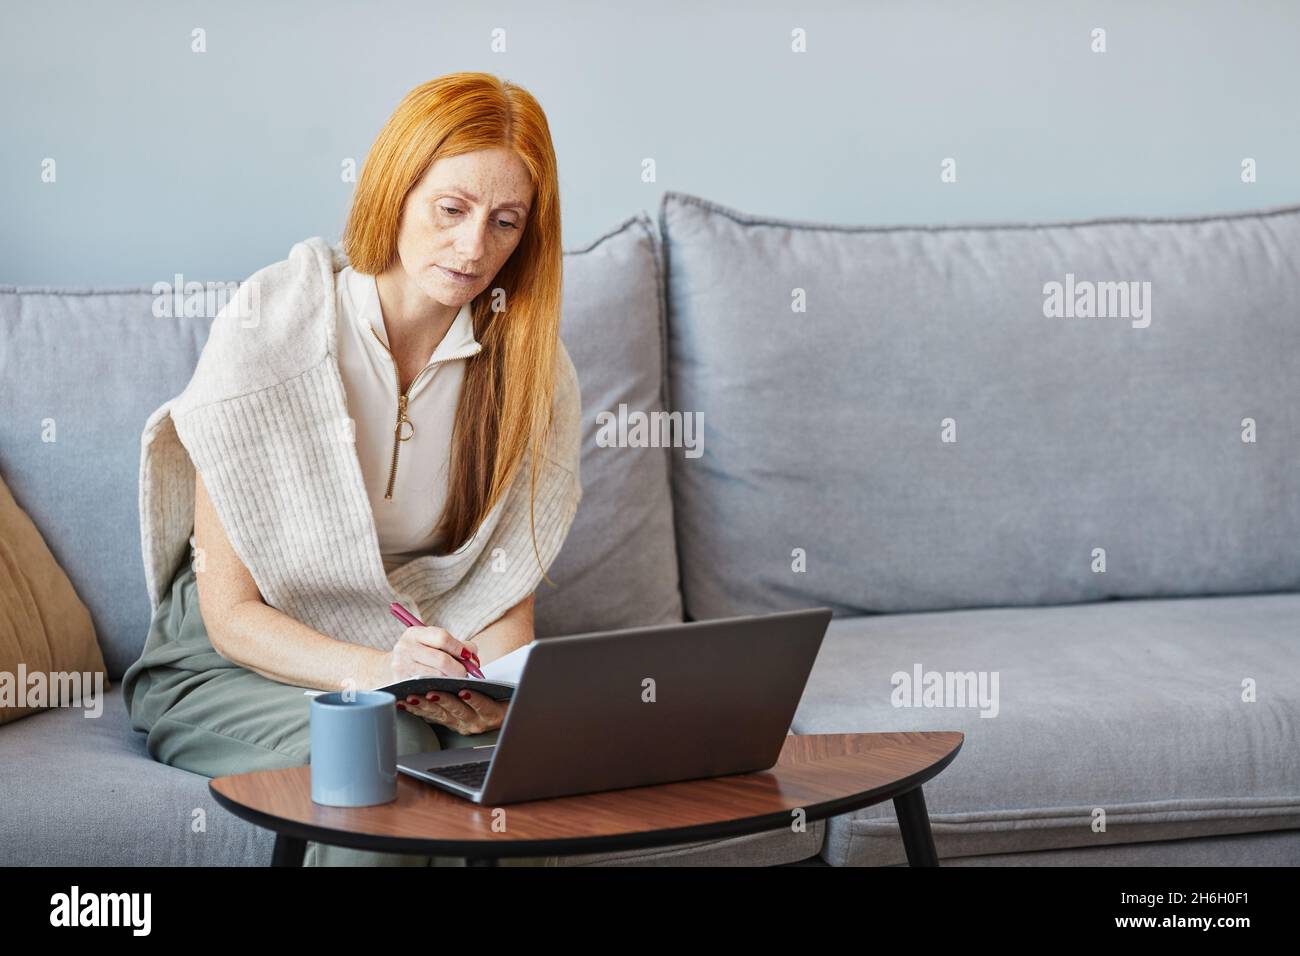 Portrait of adult red haired woman using laptop on sofa while studying online from home, copy space Stock Photo